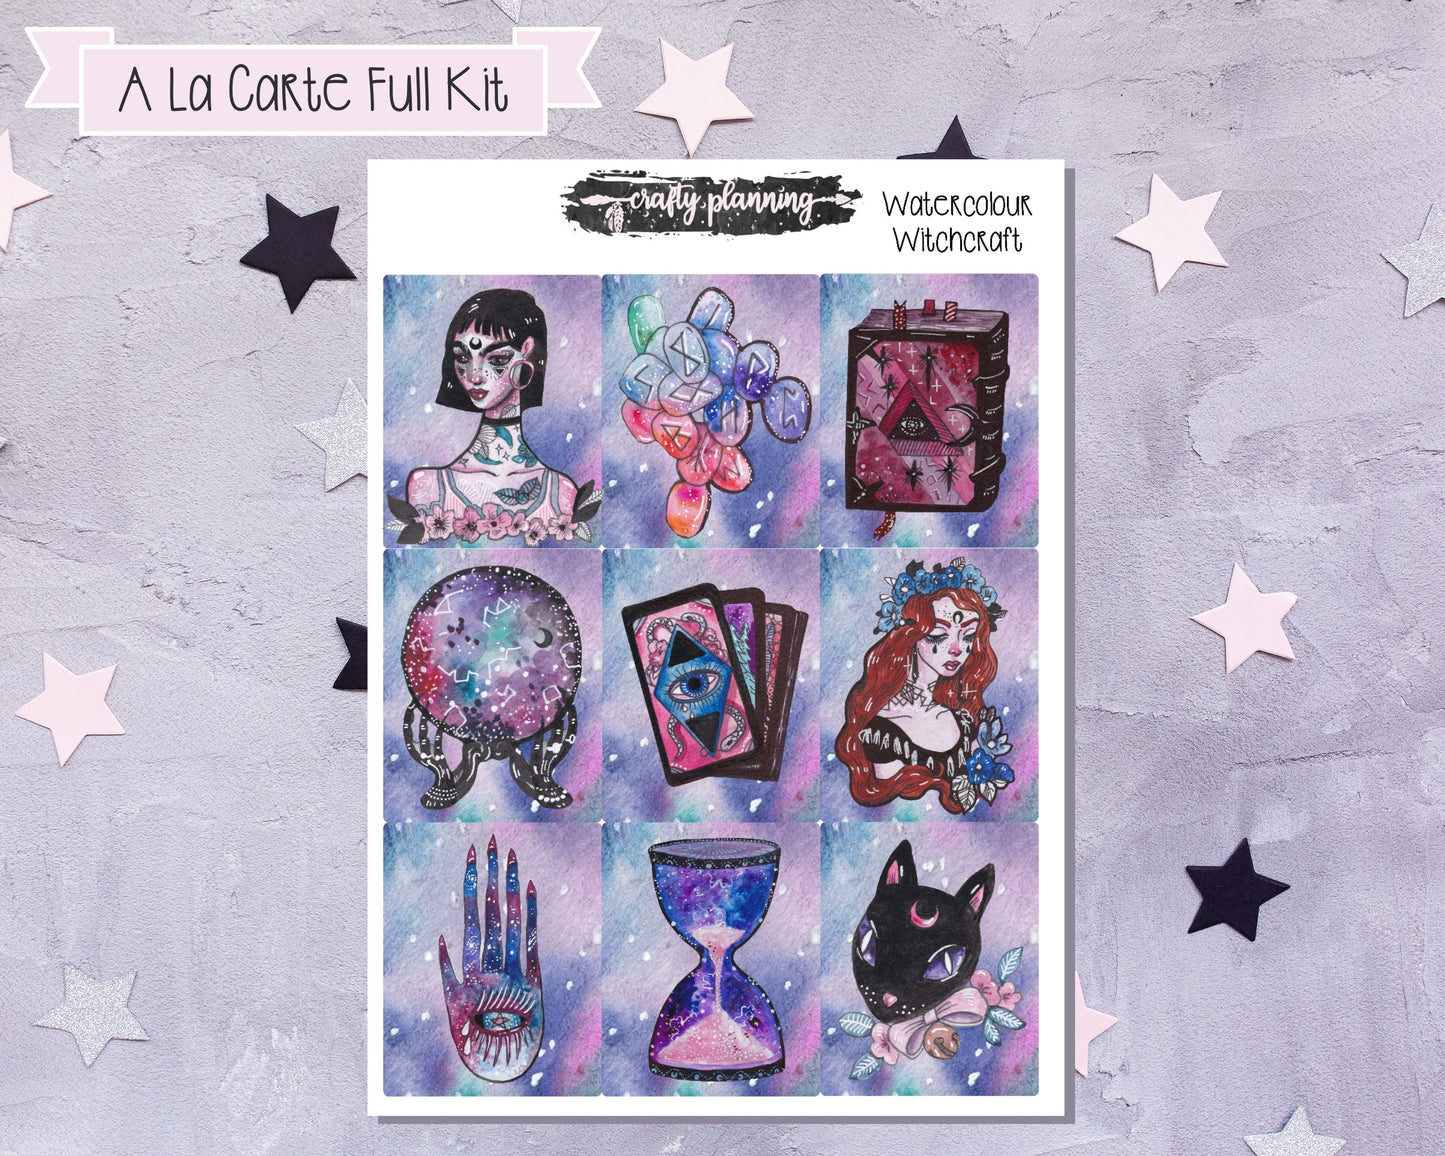 Watercolour Witchcraft Planner Kit, Weekly Planner Kit, Witchcraft Stickers, Gothic Stickers, Tarot Stickers, Planner Stickers